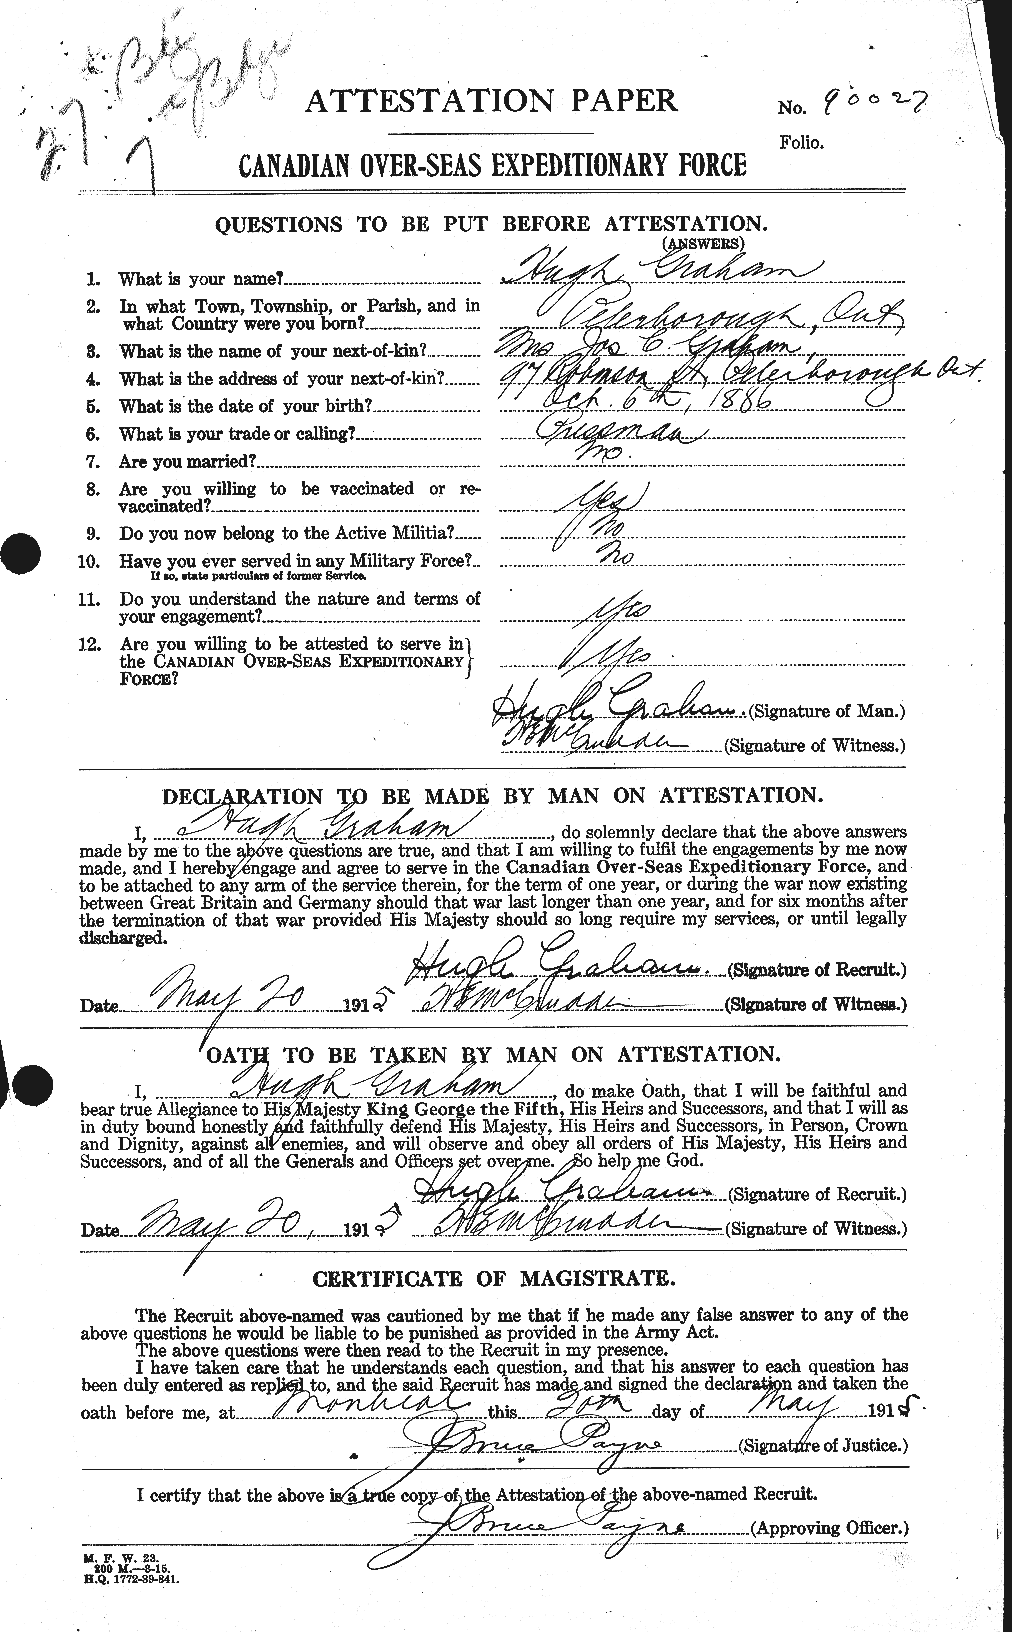 Personnel Records of the First World War - CEF 357754a